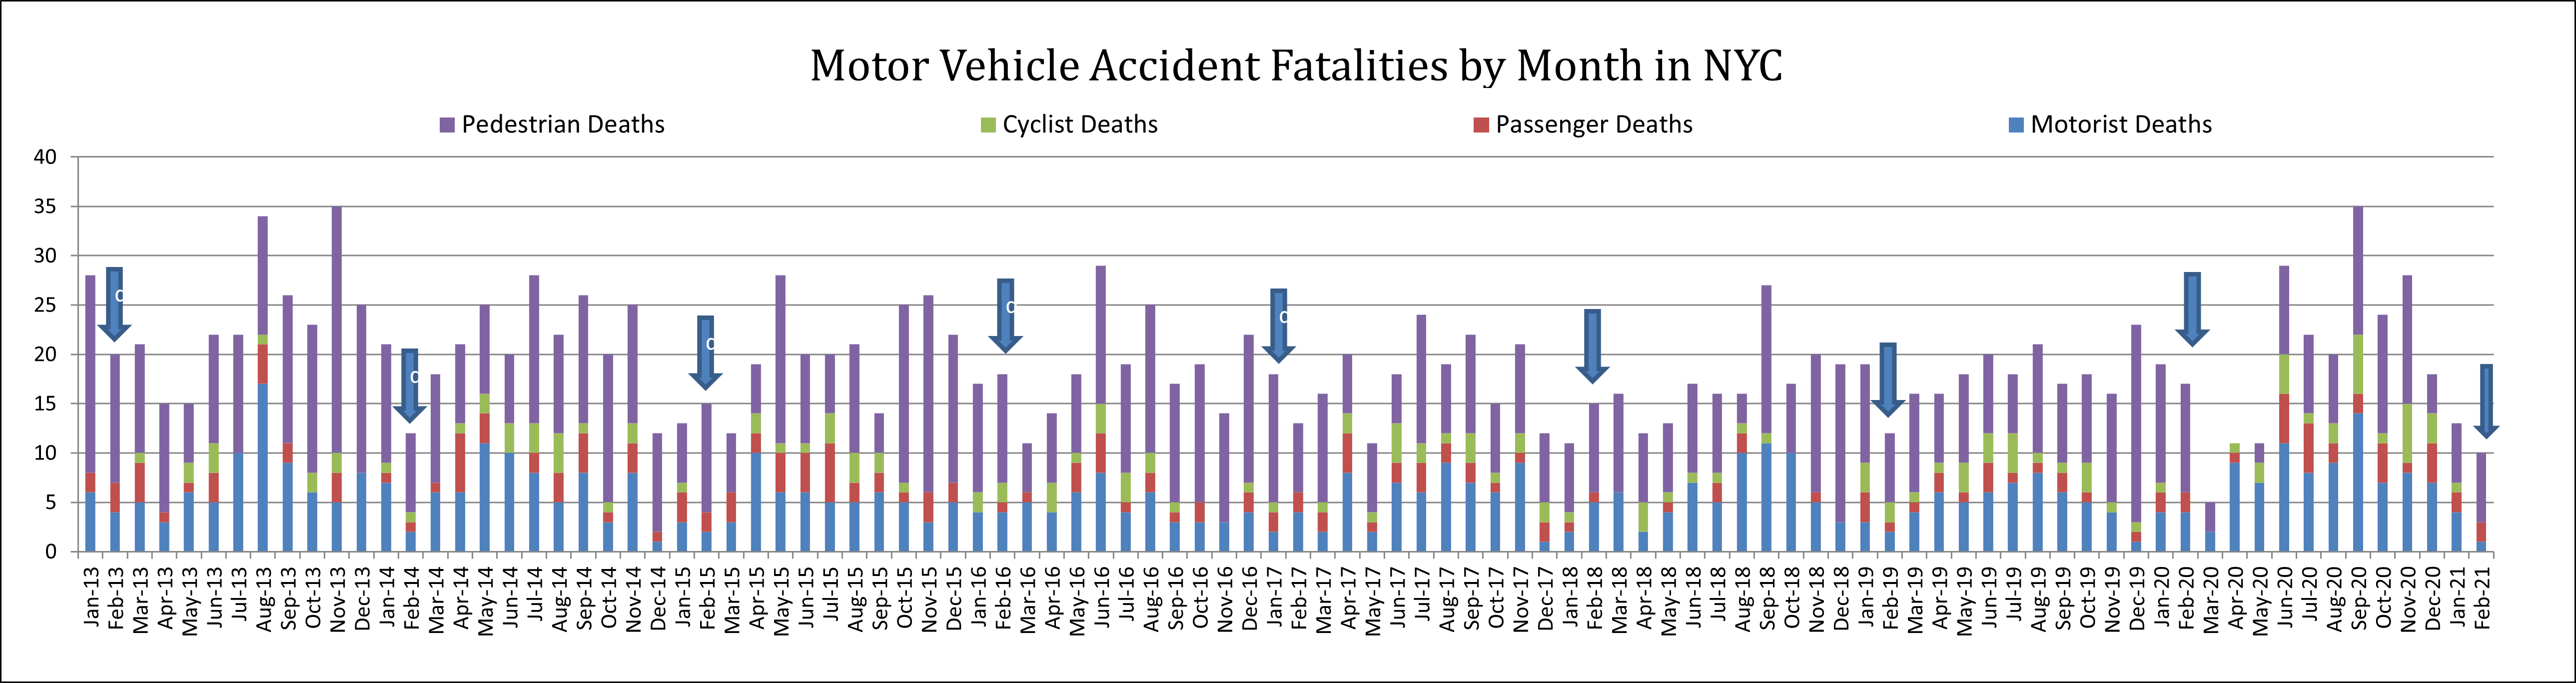 Car accident fatalities by category February 2021